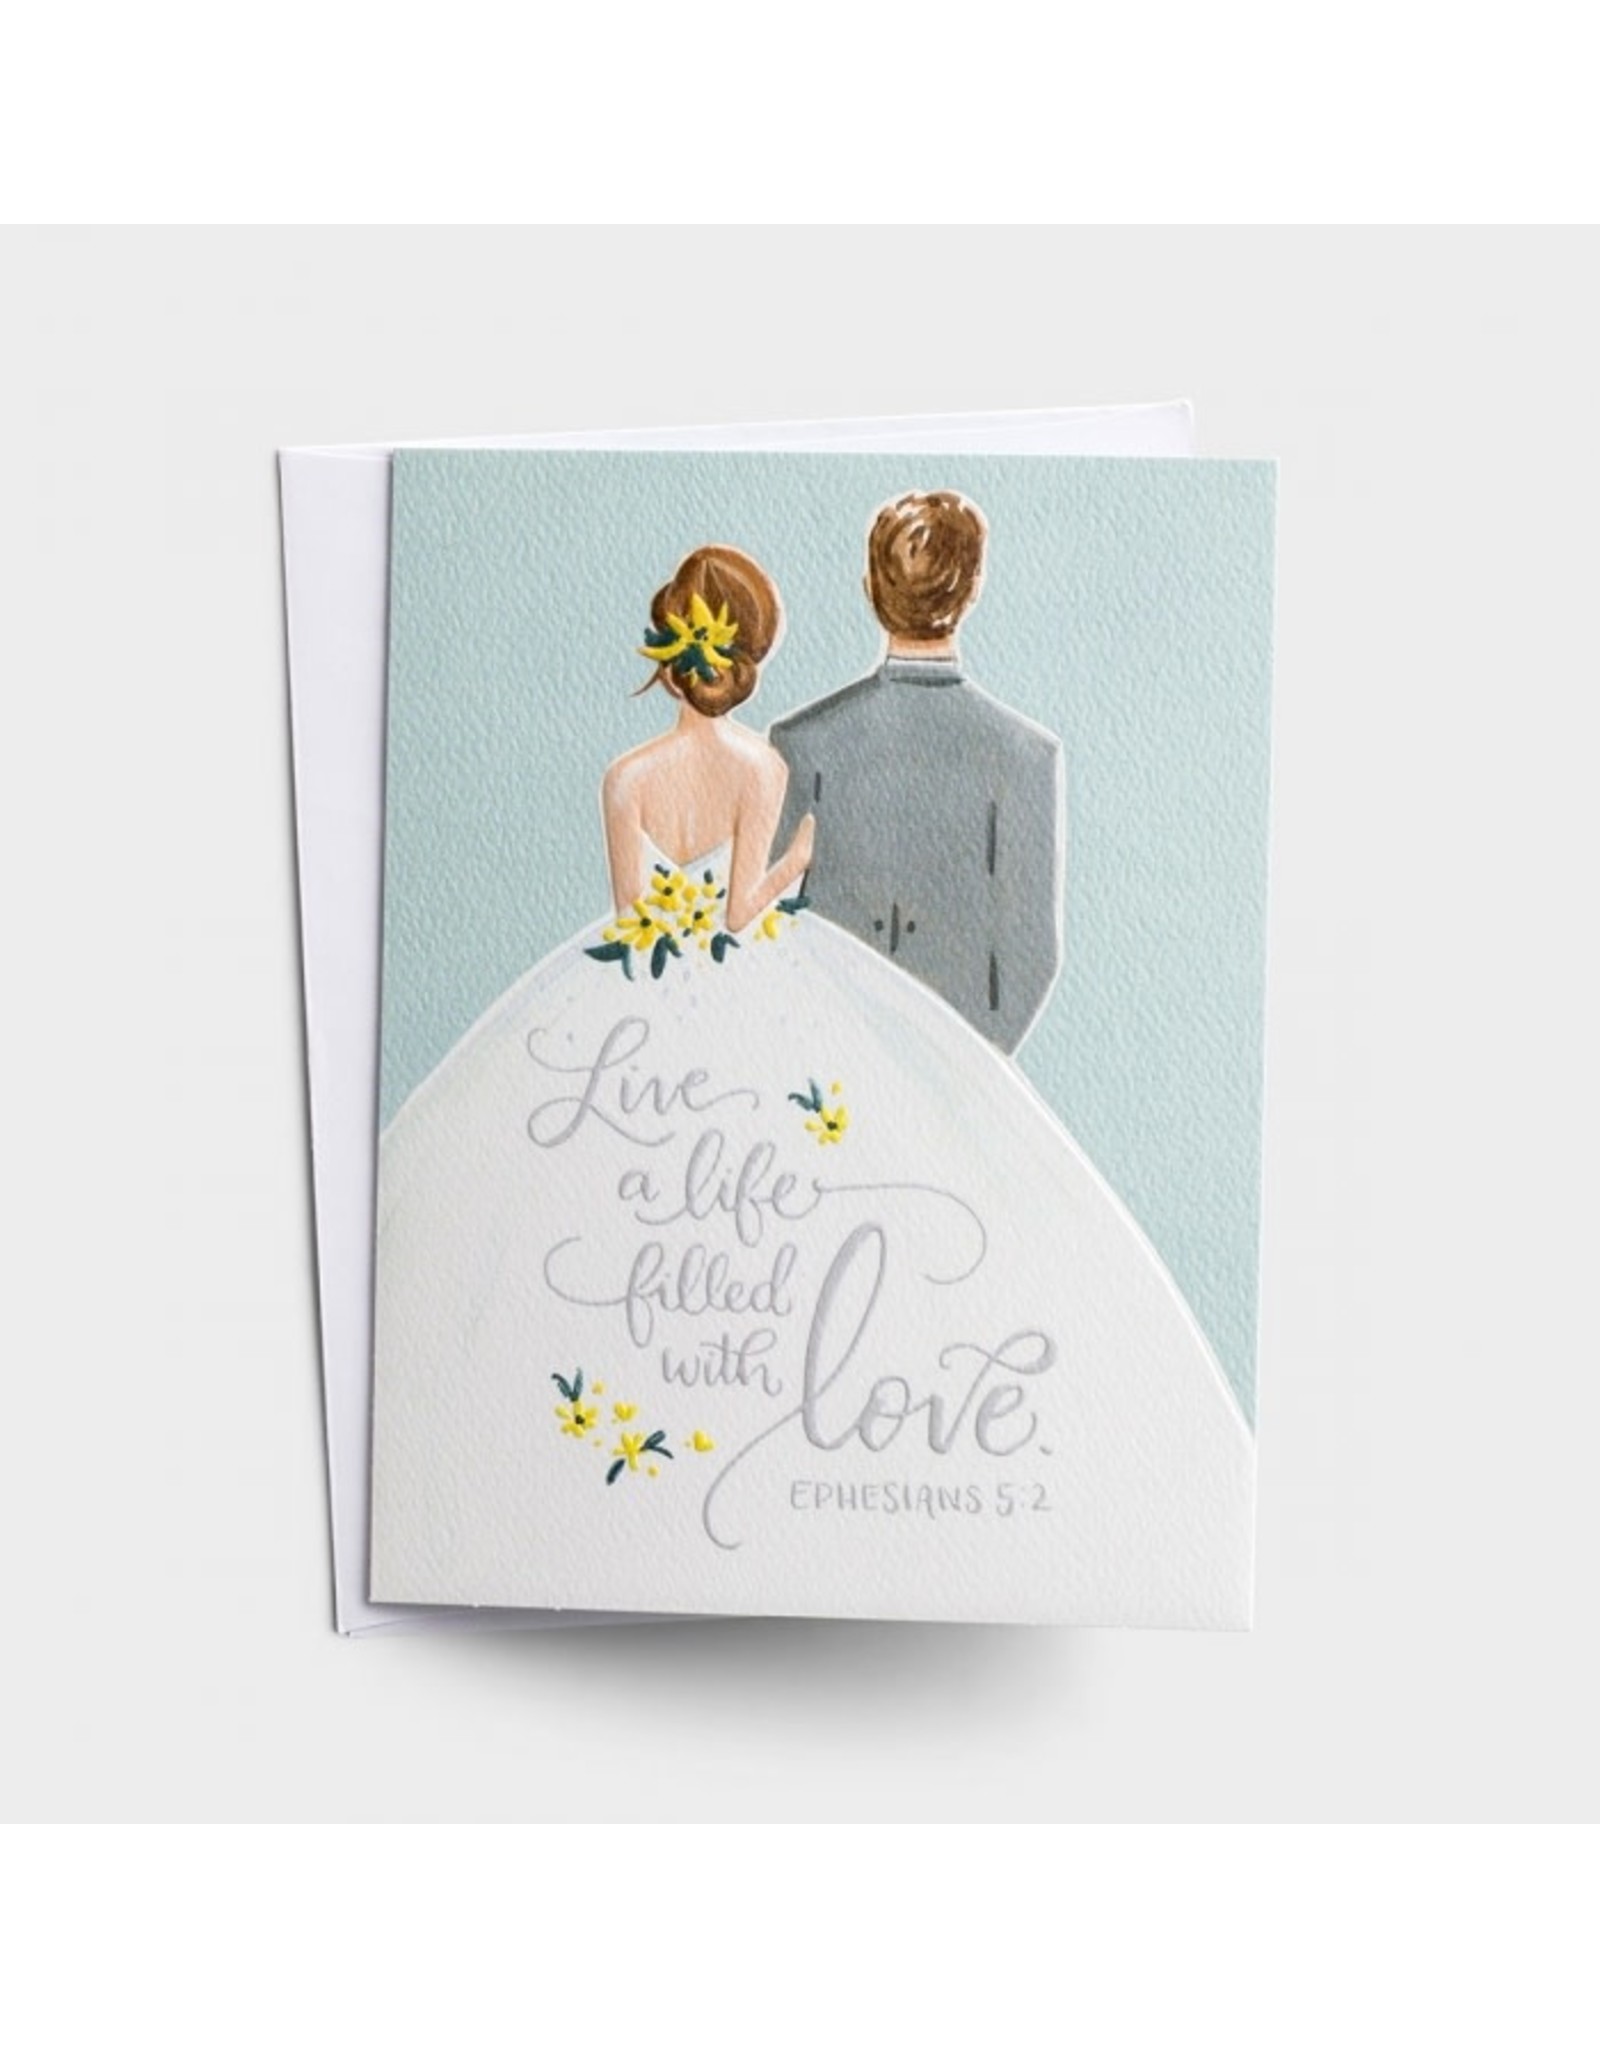 Studio 71 Wedding Card - Life Filled with Love